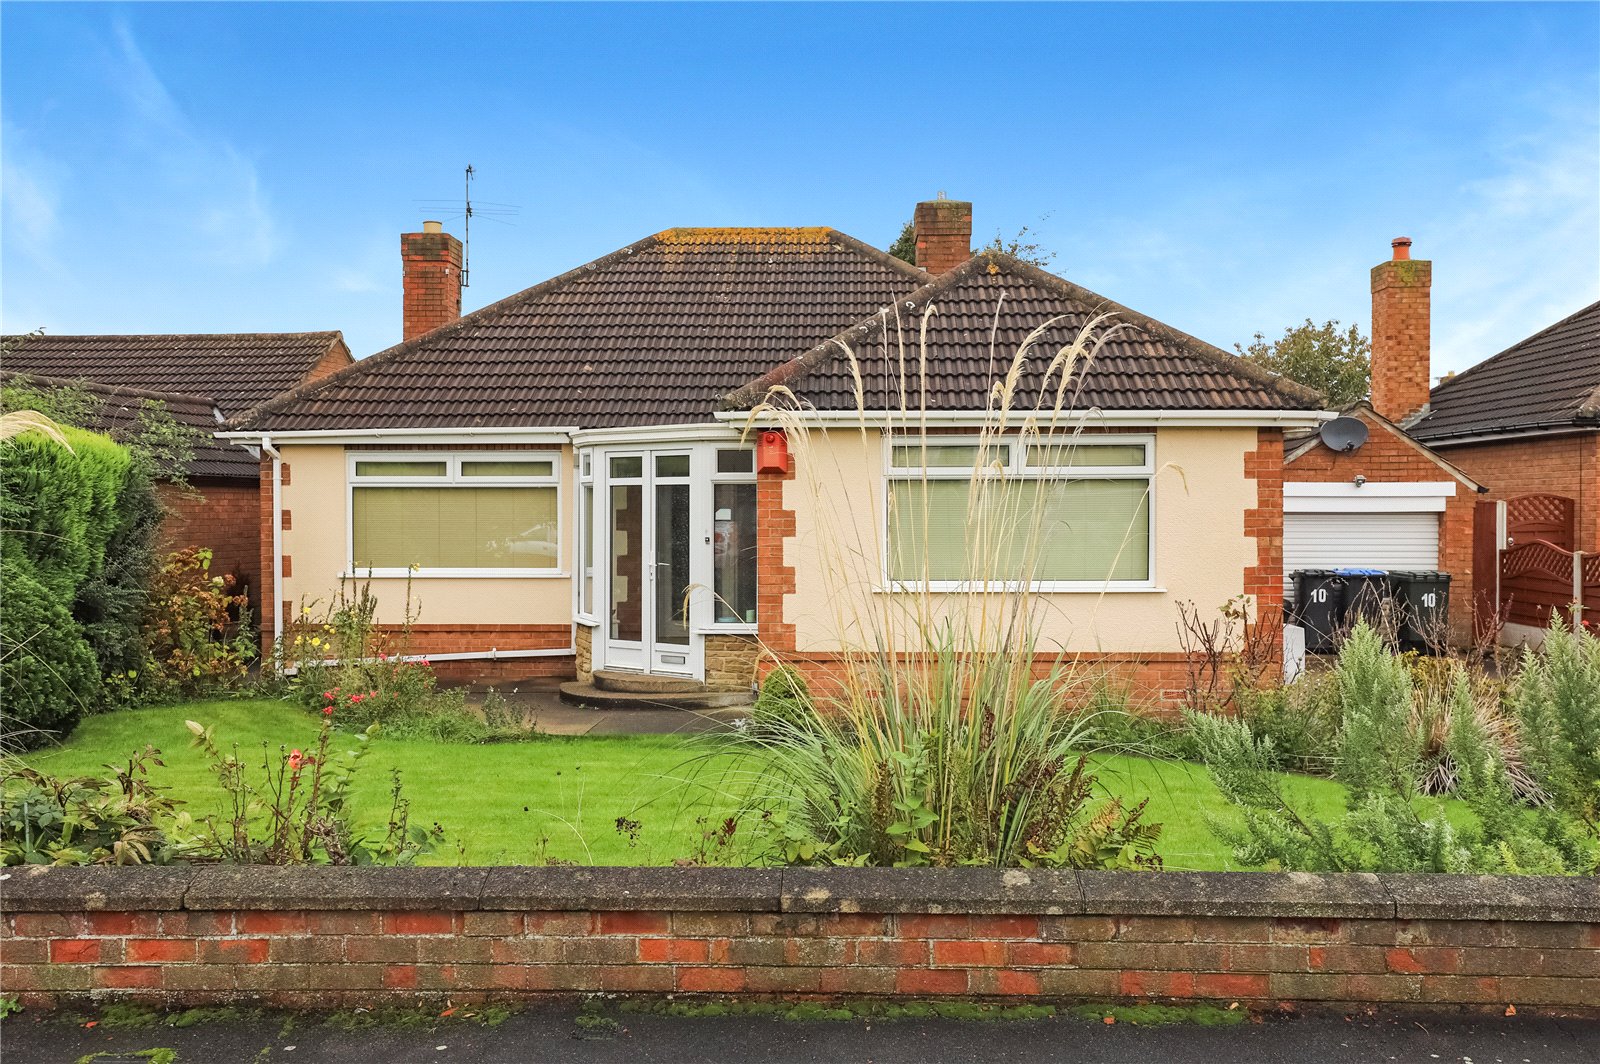 2 bed bungalow for sale - Property Image 1